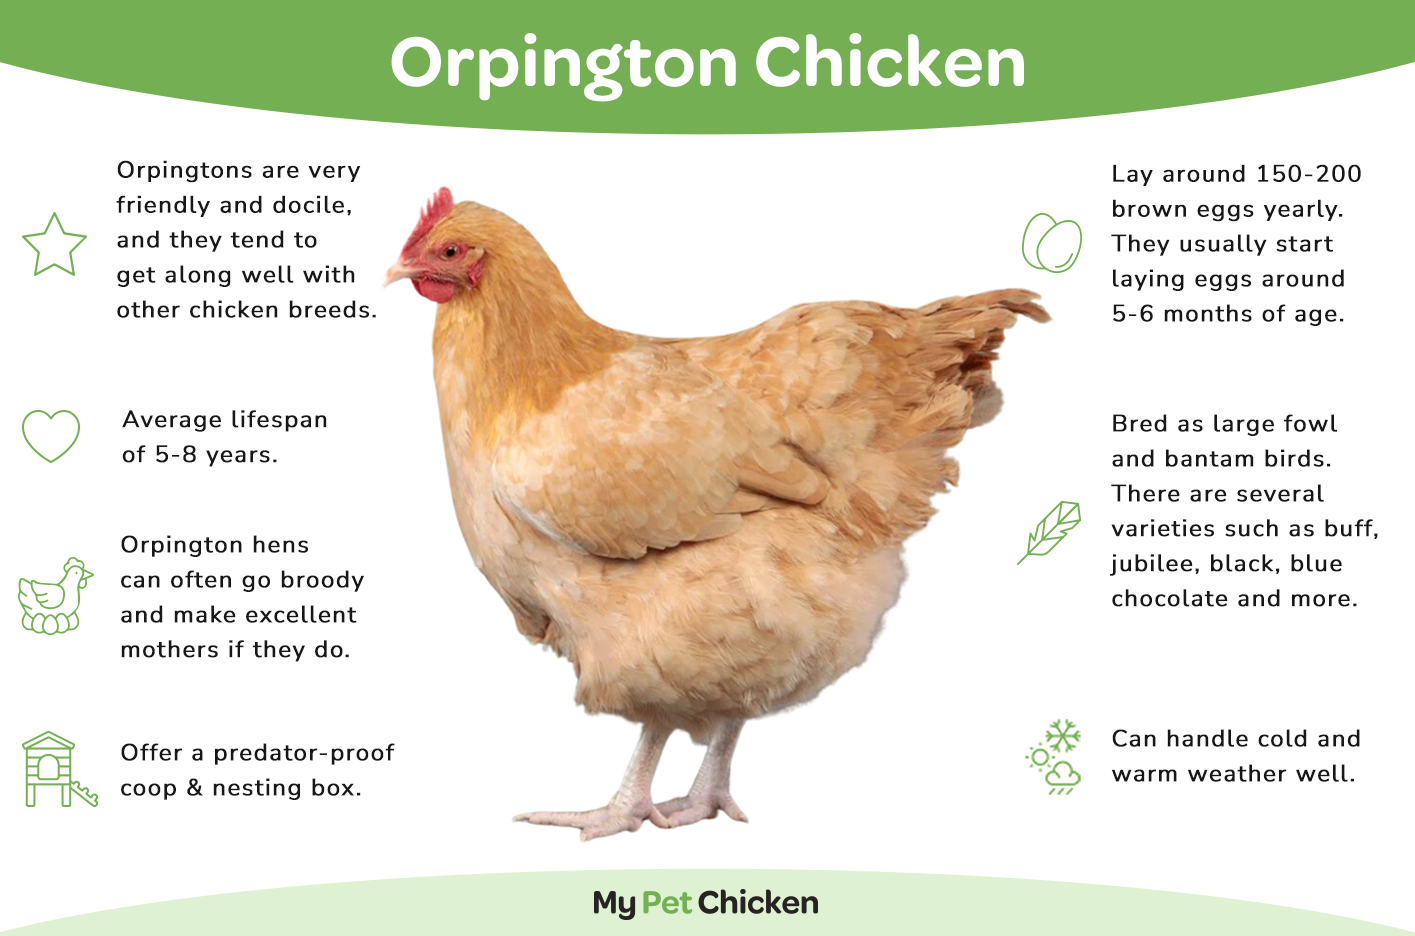 The Orpington chicken is a friendly and docile breed.